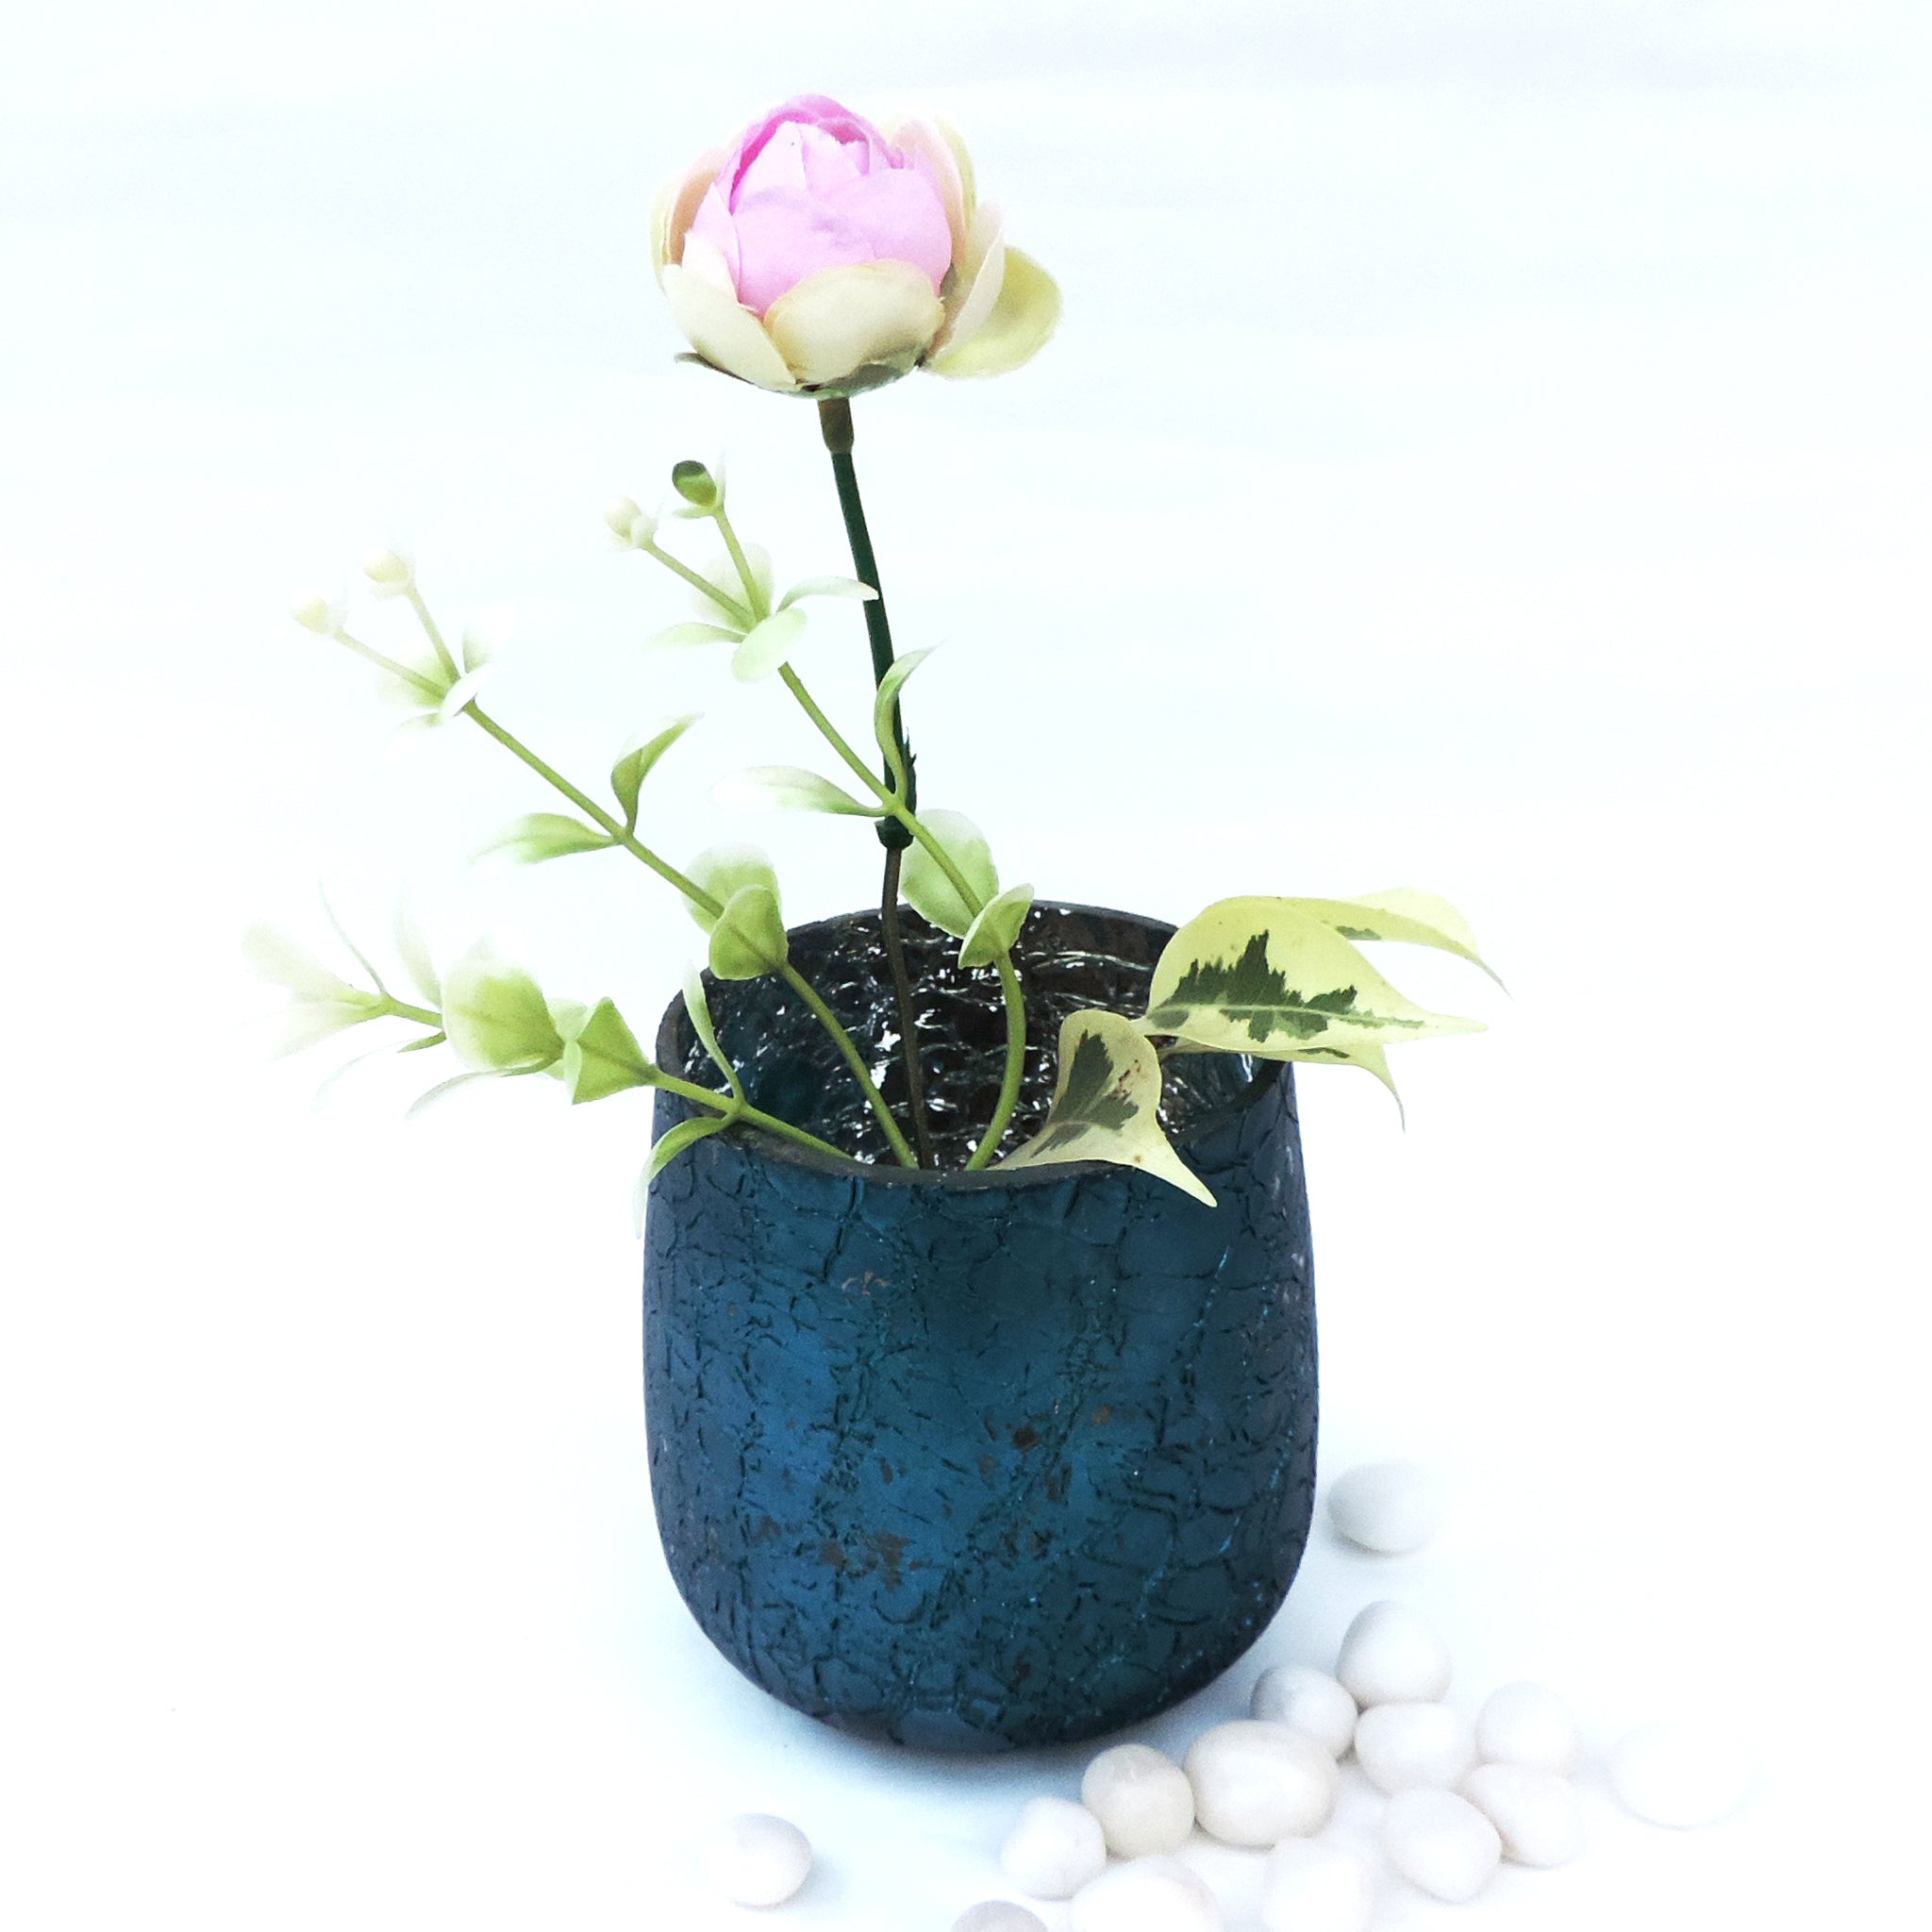 Bud Vase / Glass Vase for Wedding, Events Decorating, Arrangements, Flowers, Office or Home Decor /Turquoise/3.5"x4"